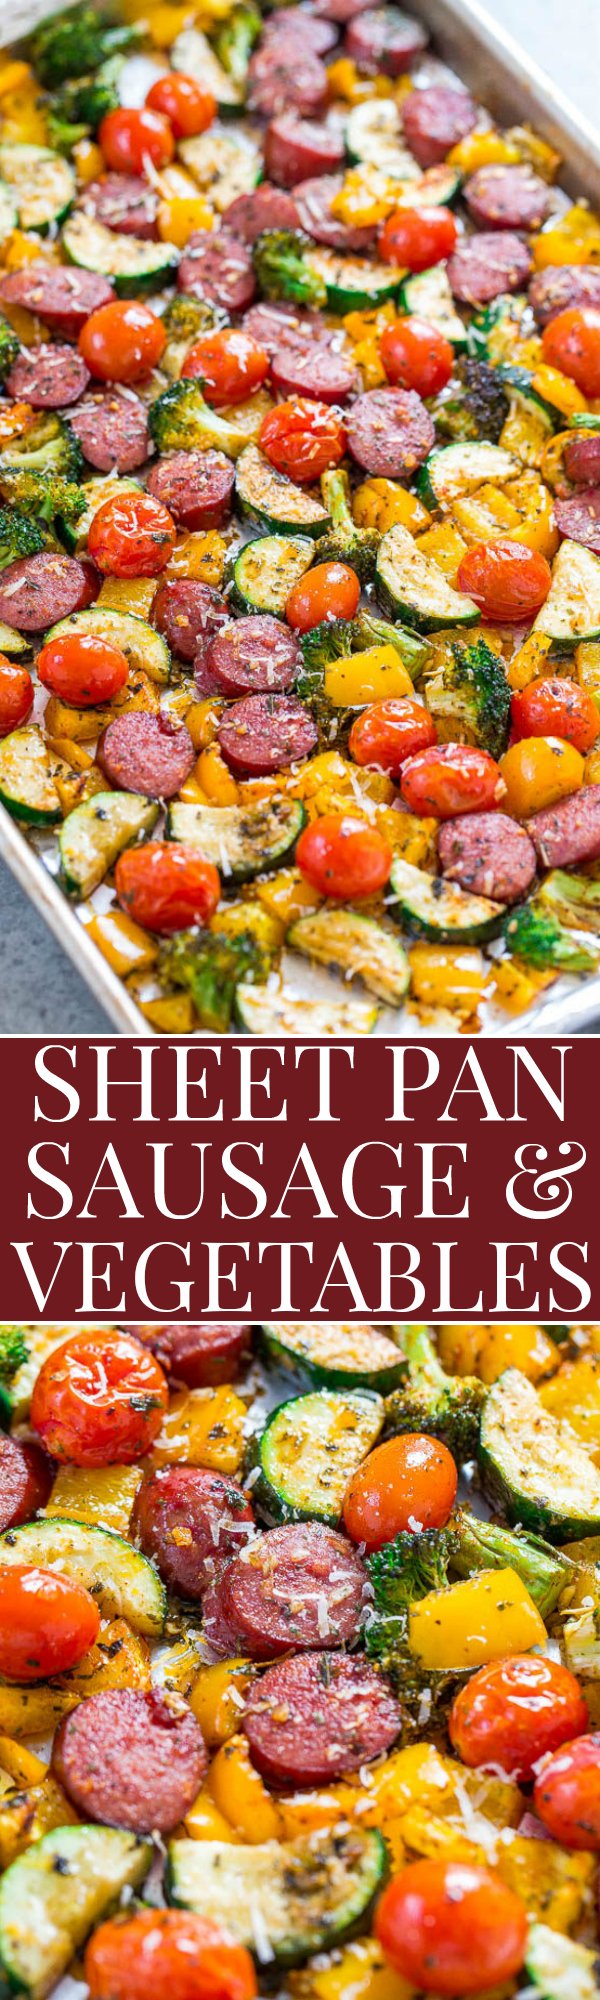 Sheet Pan Sausage and Veggies — This sheet pan sausage dinner can be made with your pre-cooked sausage of choice and is done in under an hour. Plus, this recipe is super customizable! 